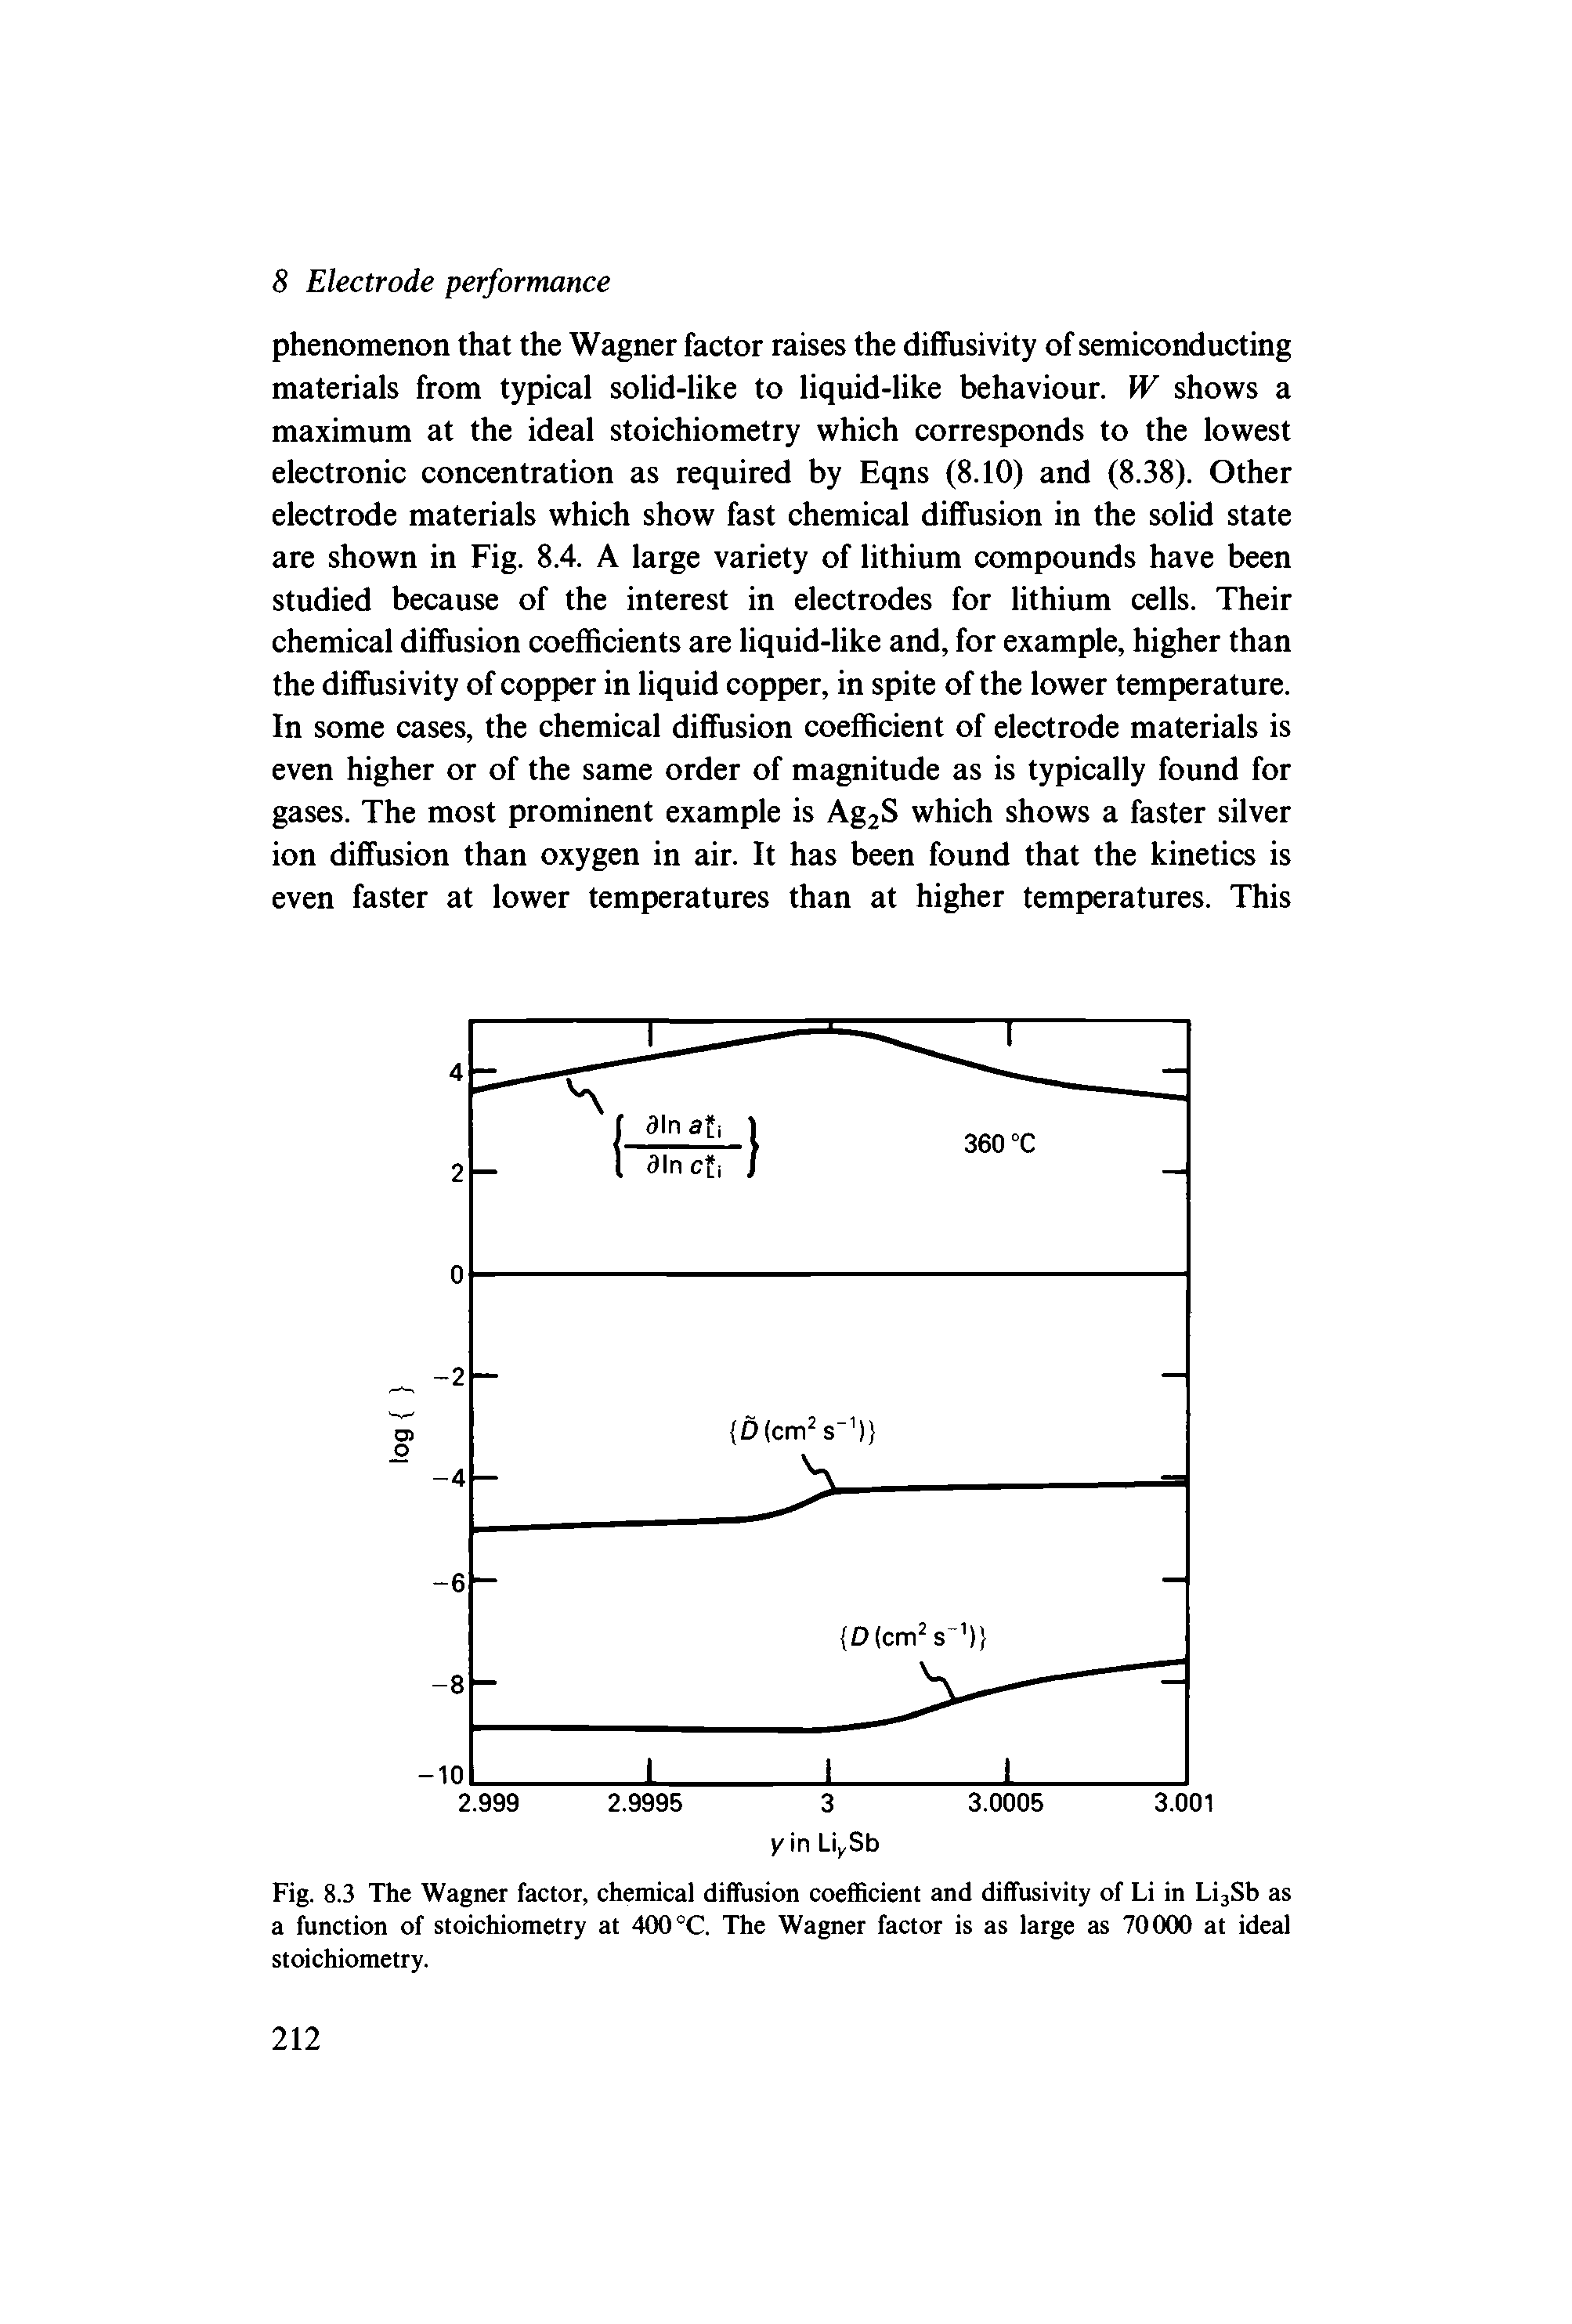 Fig. 8.3 The Wagner factor, chemical diffusion coefficient and diffusivity of Li in LijSb as a function of stoichiometry at 400 °C. The Wagner factor is as large as 70000 at ideal stoichiometry.